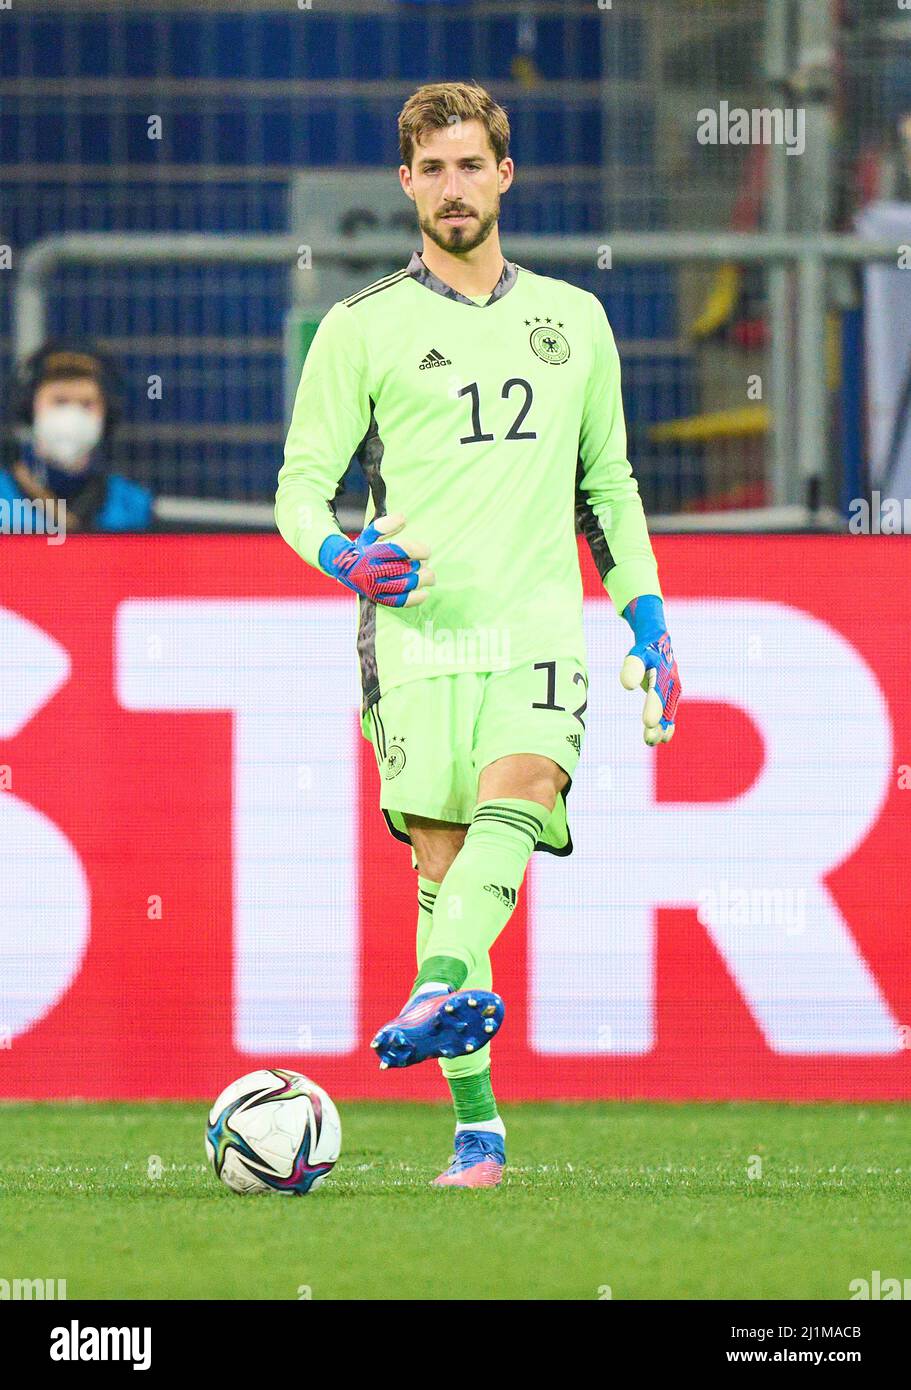 Kevin Trapp, goal keeper DFB 12 in the friendly match GERMANY - ISRAEL Preparation for World Championships 2022 in Qatar ,Season 2021/2022, on Mar 26, 2022  in Sinsheim, Germany.  © Peter Schatz / Alamy Live News Stock Photo